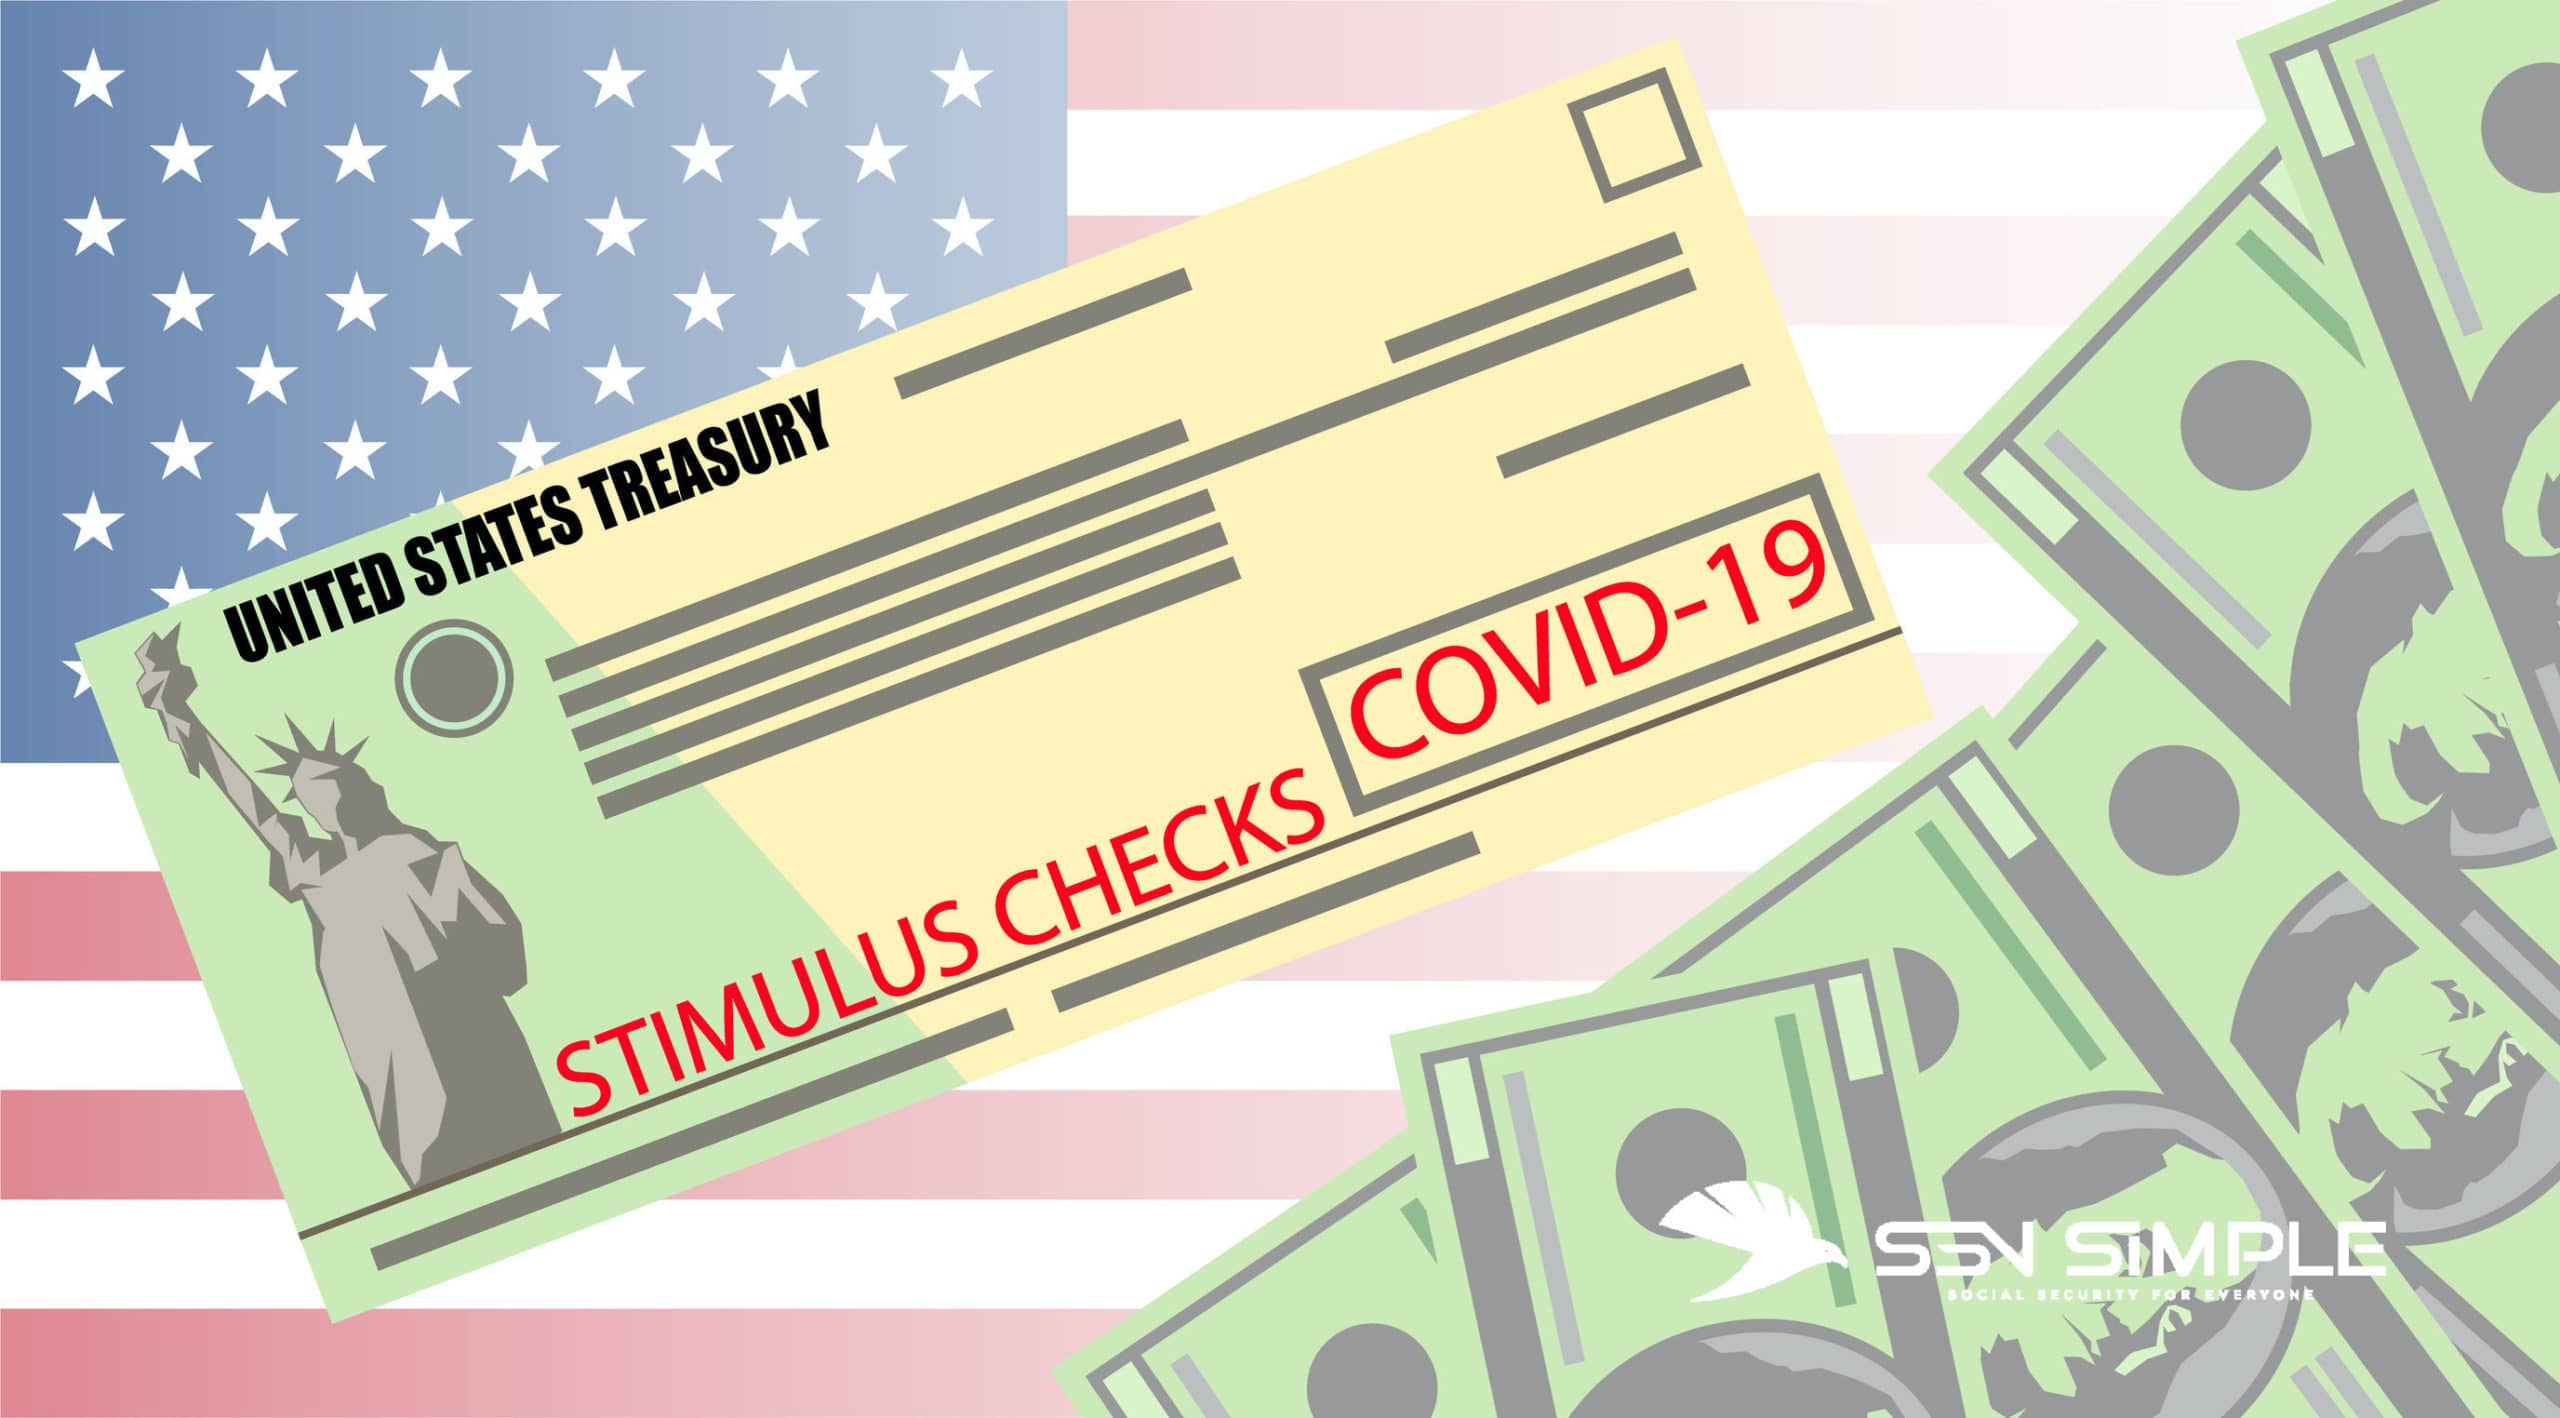 How To Get A Stimulus Check If You Receive Social Security Benefits